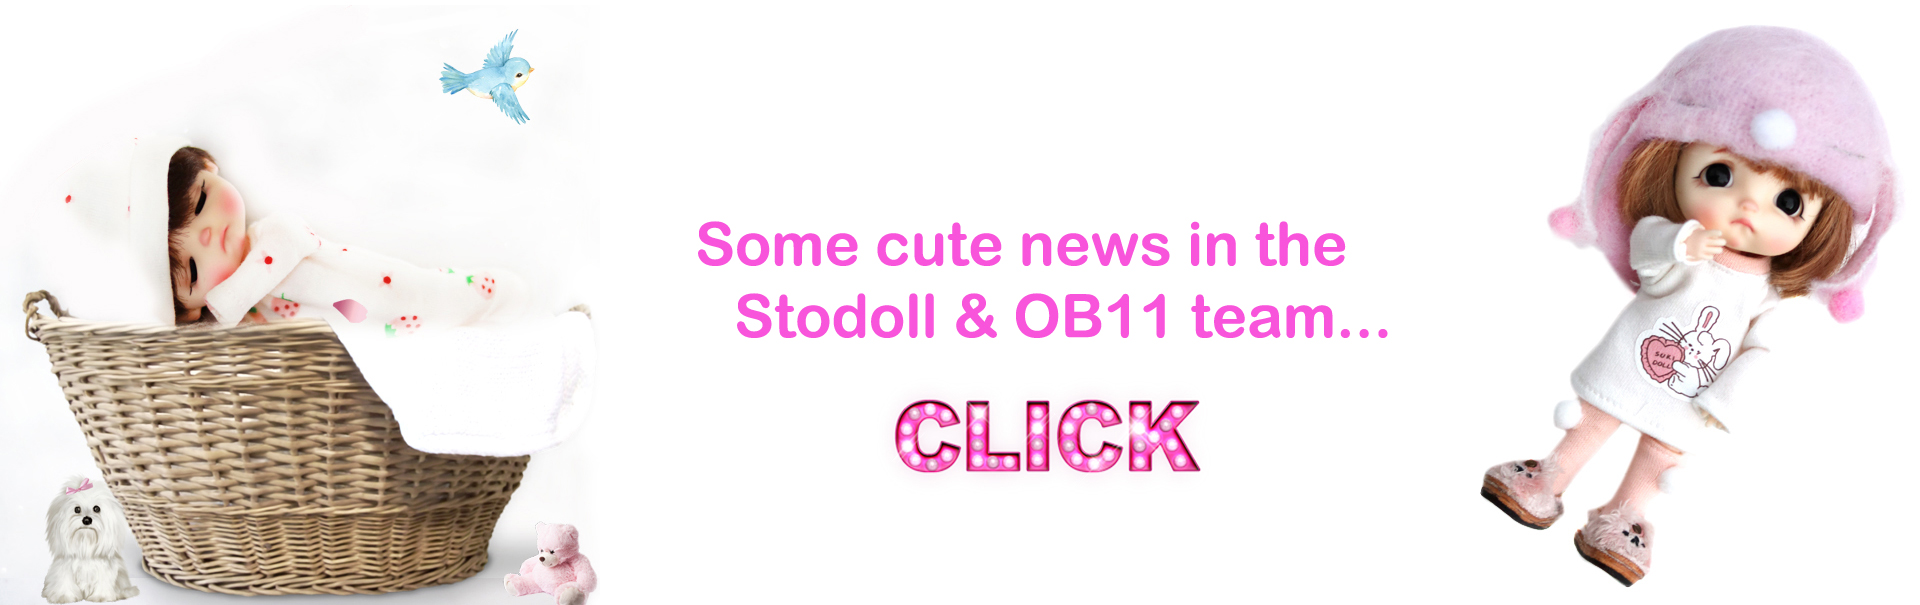 Some news in the Stodoll team...